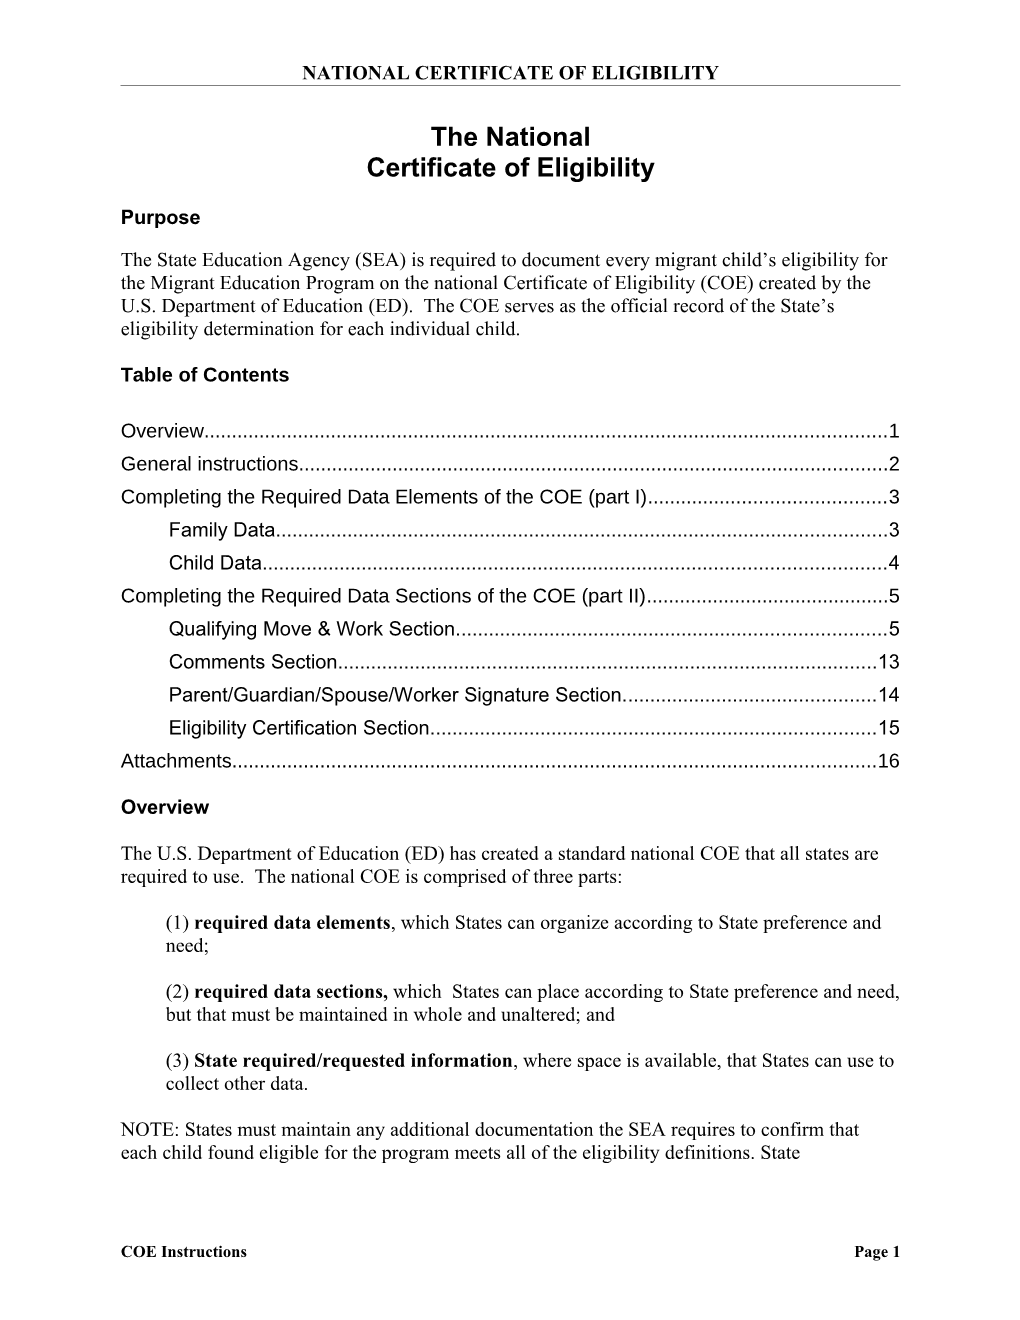 The National Certificate of Eligibility